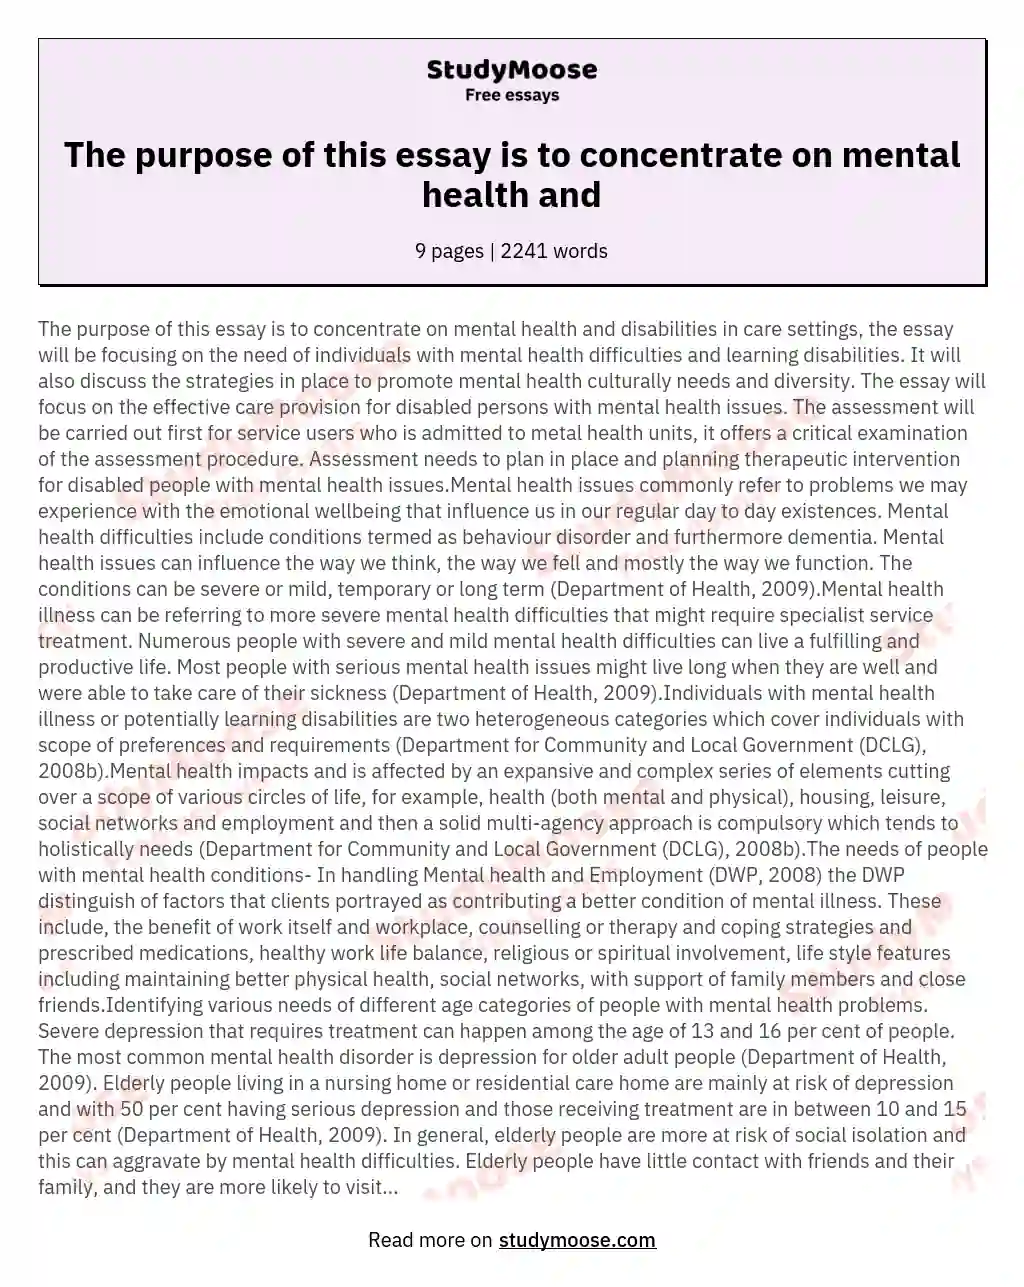 The purpose of this essay is to concentrate on mental health and essay